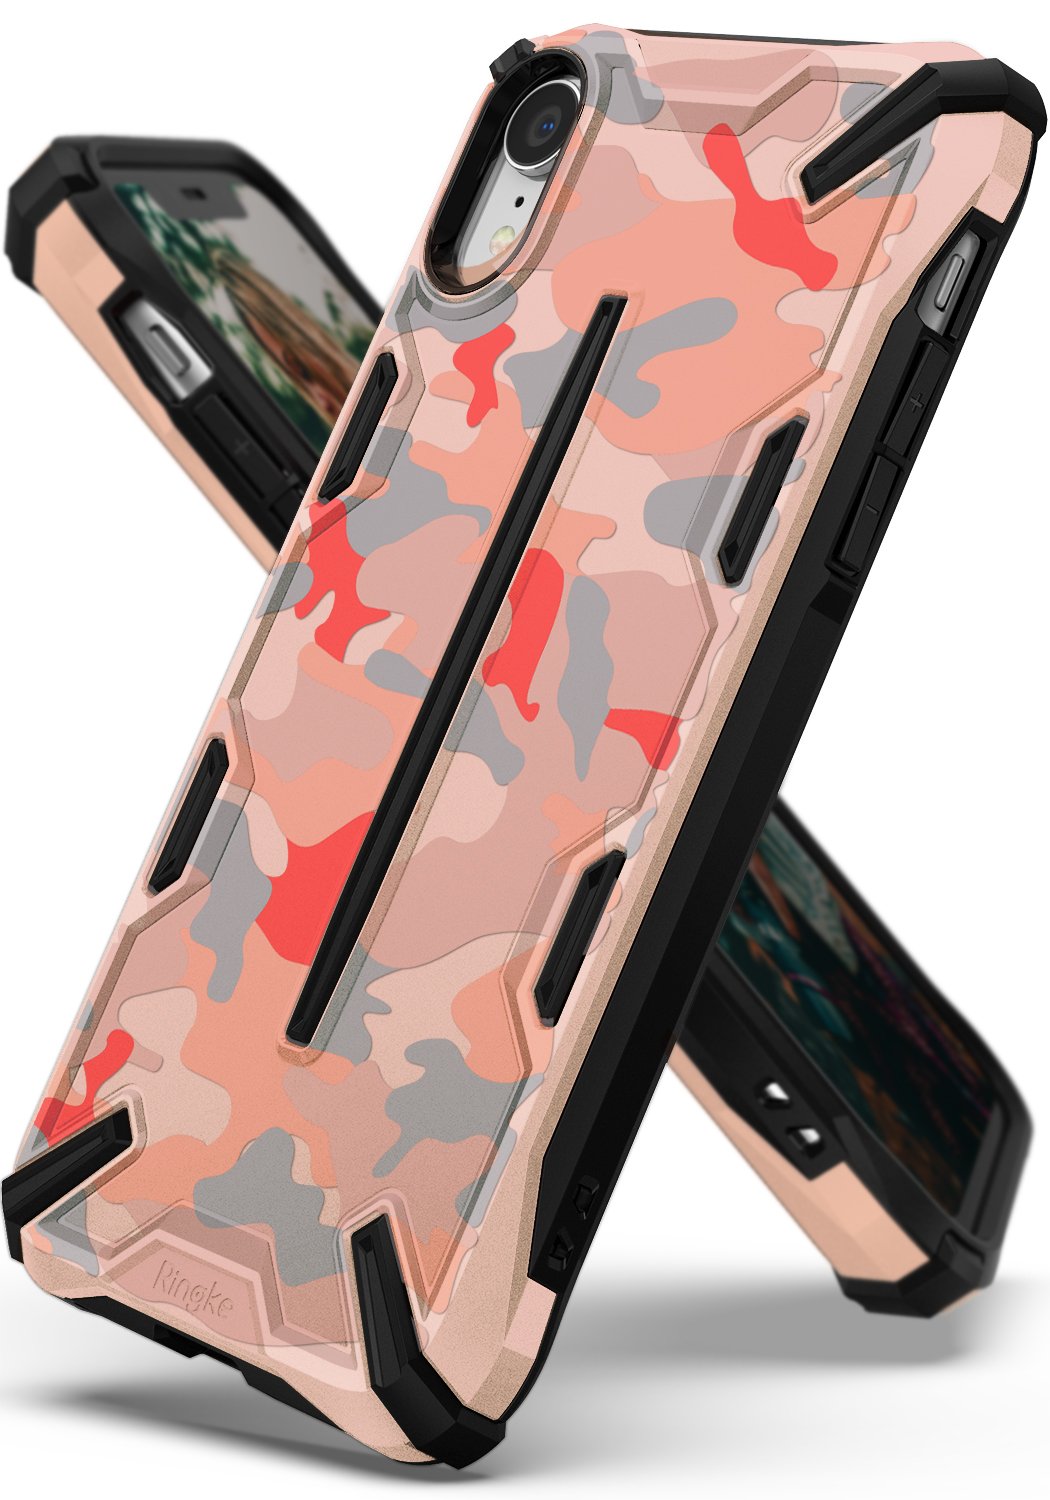 ringke dual-x design for iphone xr case cover main camo pink